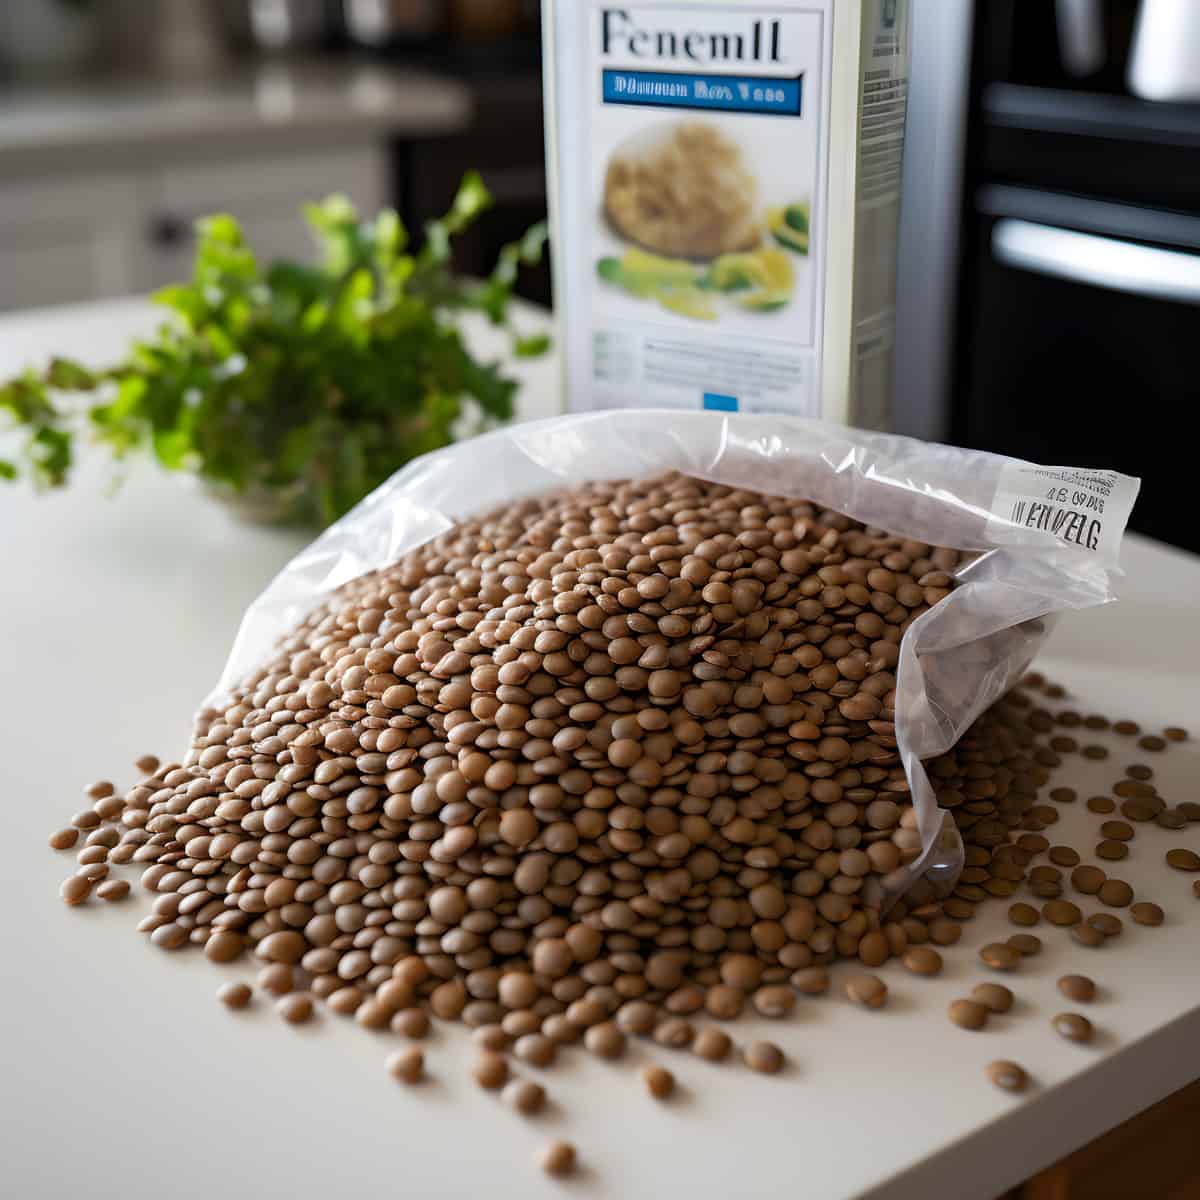 Pennell Lentil on a kitchen counter